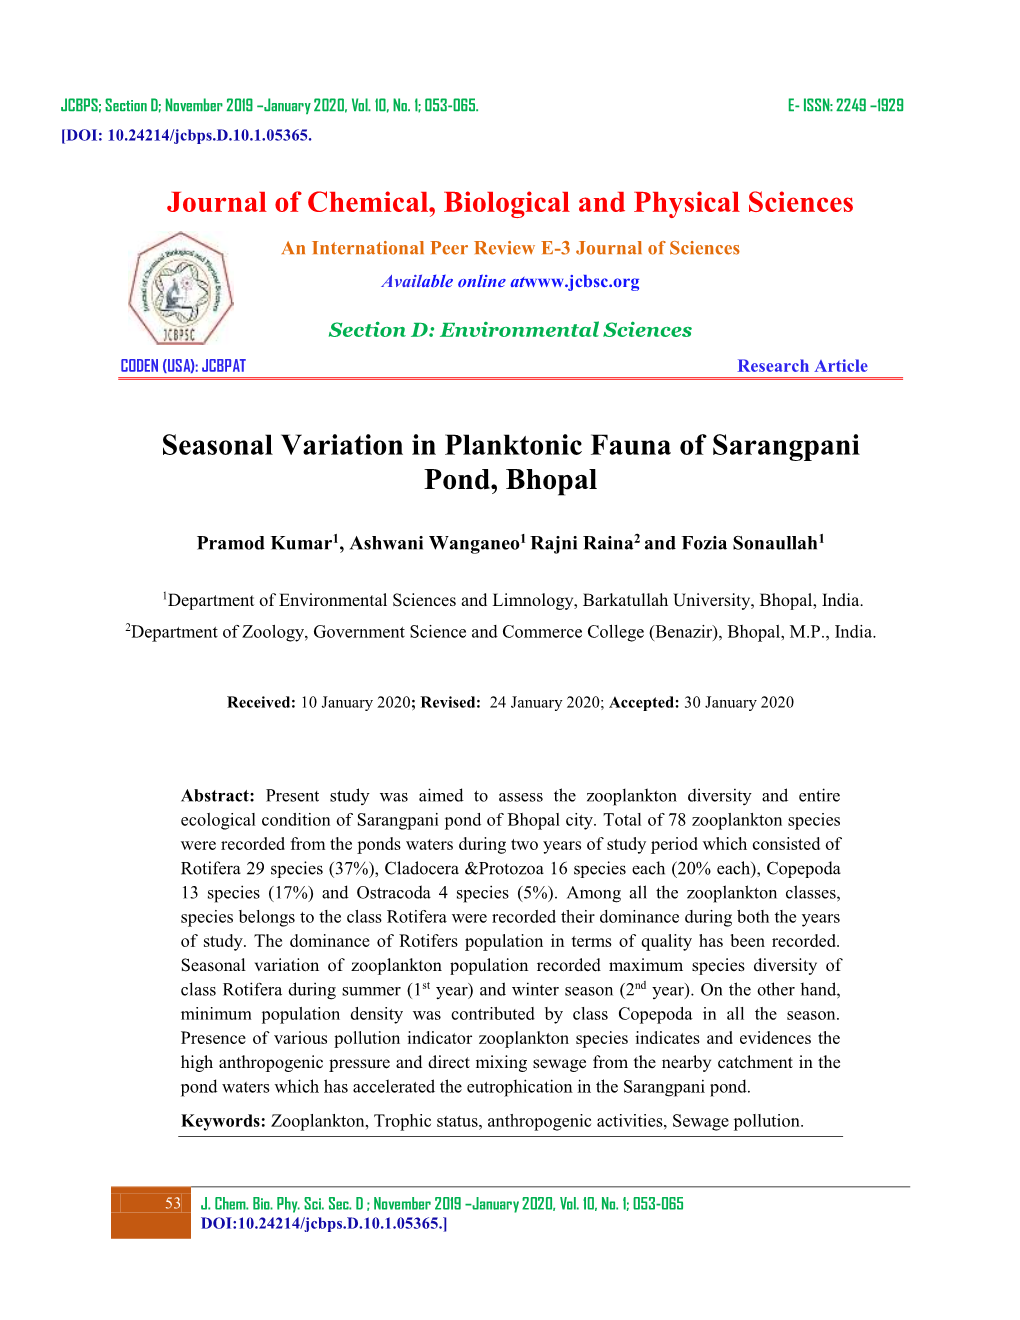 Journal of Chemical, Biological and Physical Sciences Seasonal